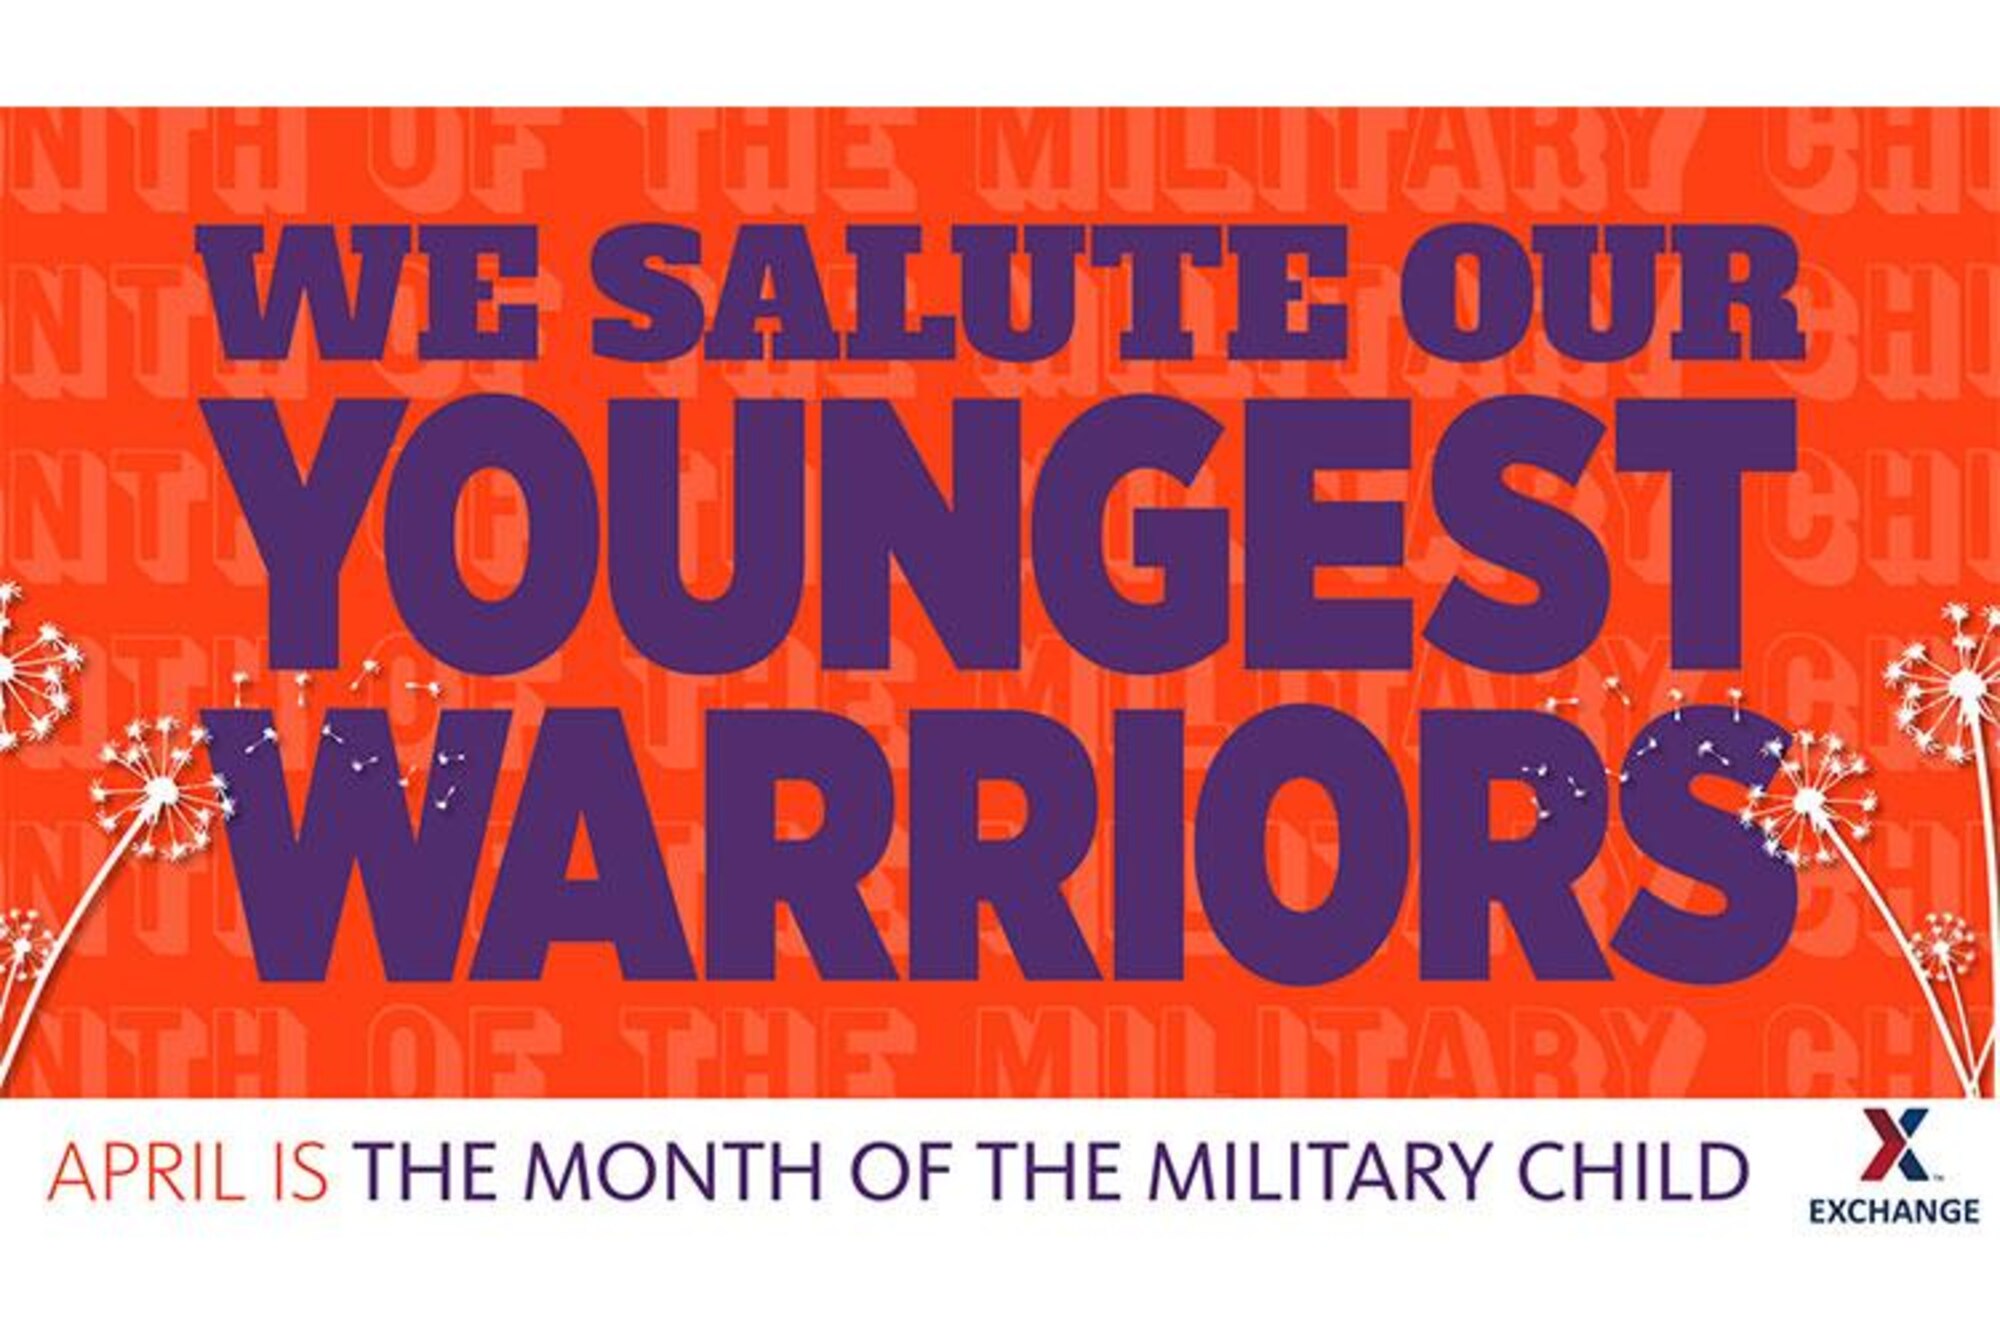 The Army & Air Force Exchange Service, the Department of Defense’s largest retailer, is saluting the spirit of America’s youngest heroes with virtual activities, events and prizes during Month of the Military Child. (Army & Air Force Exchange Service Public Affairs graphic)